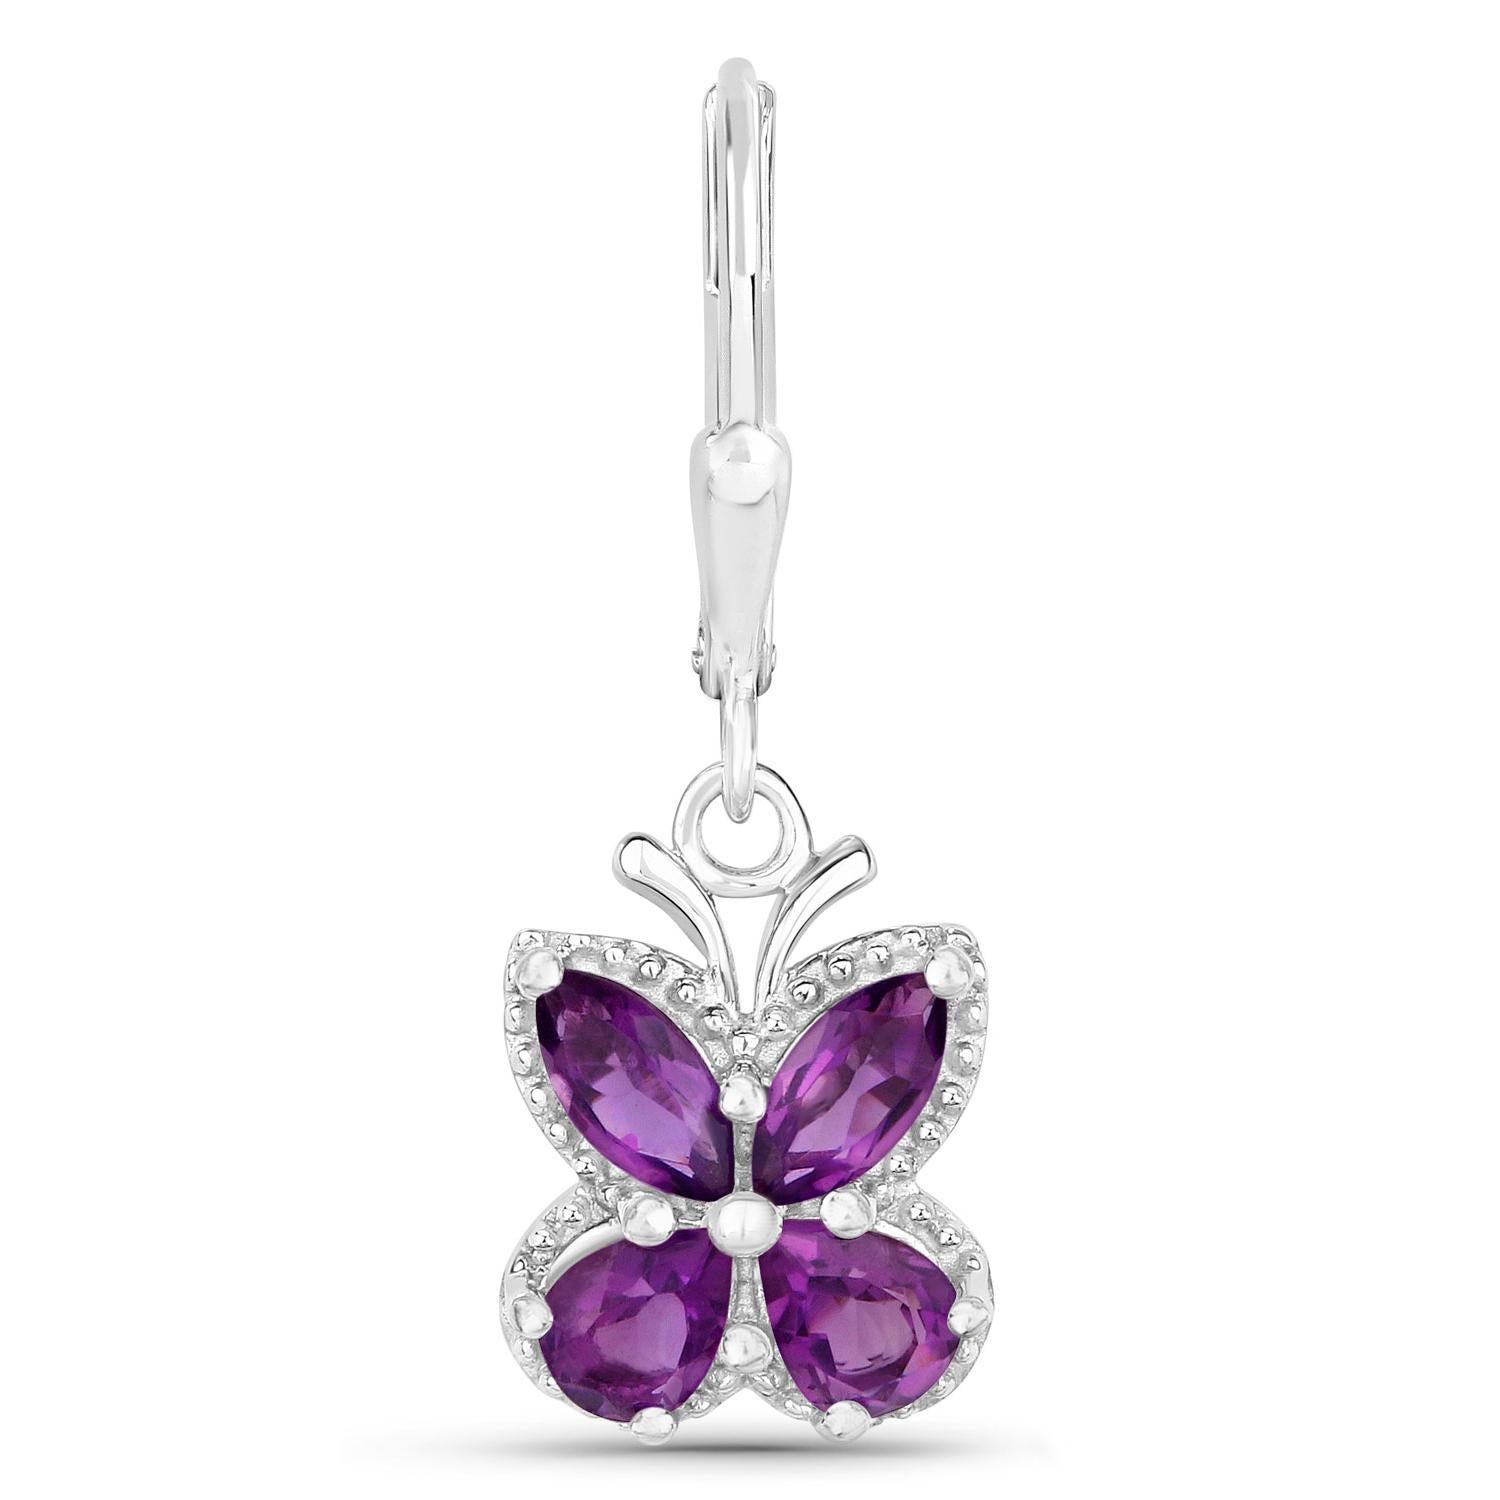 Mixed Cut Amethyst Butterfly Earrings 2.12 Carats Rhodium Plated Sterling Silver For Sale